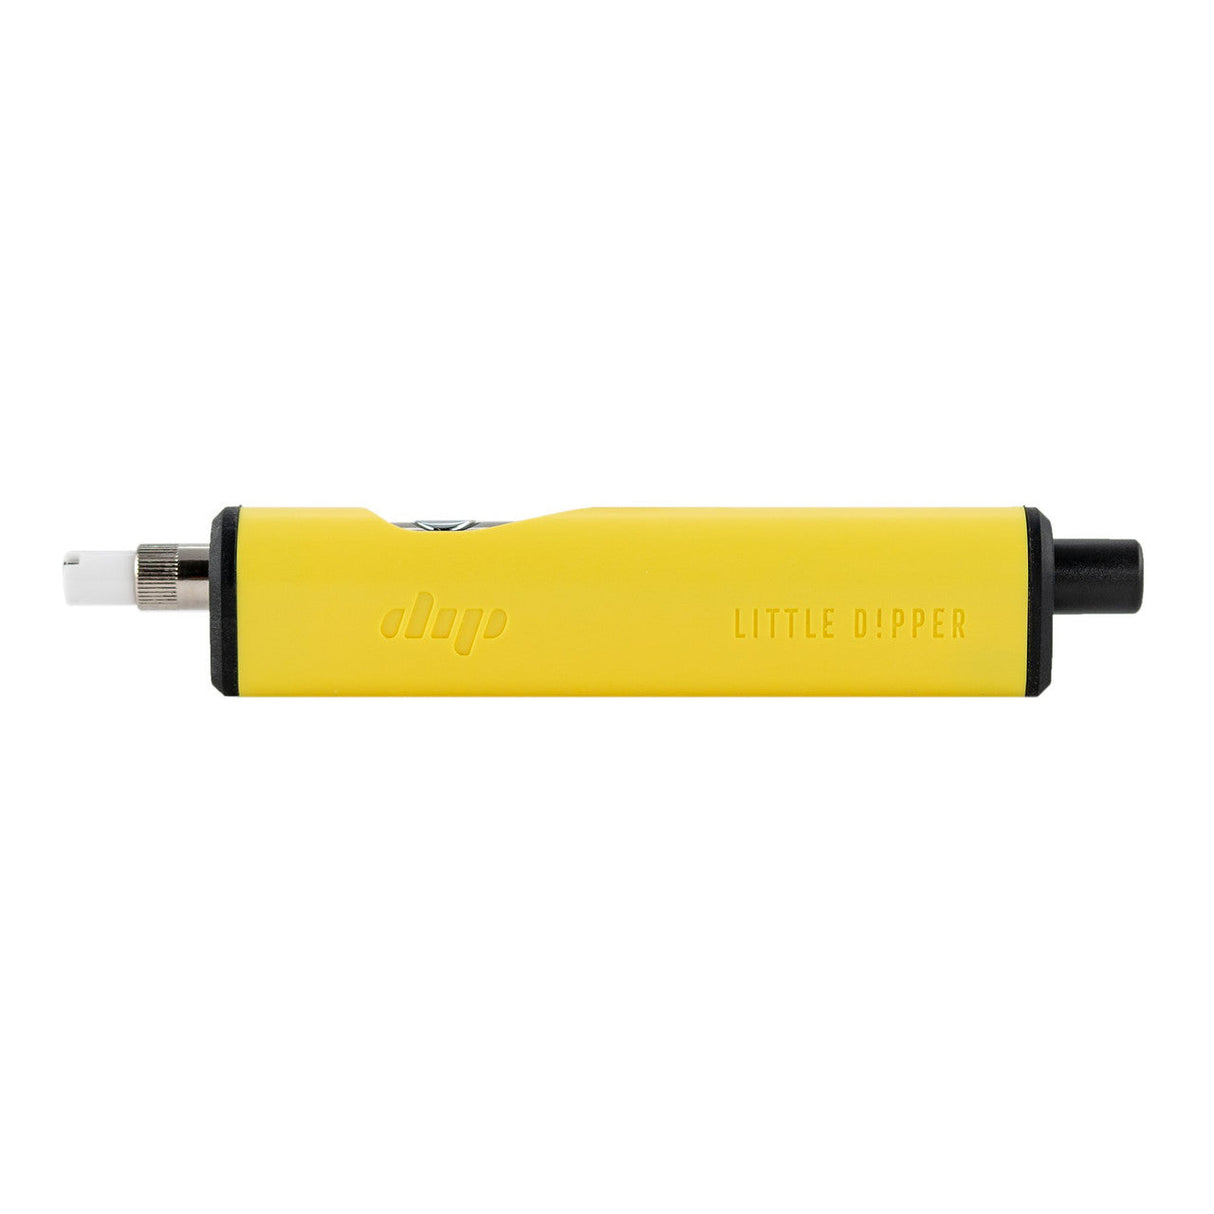 Dip Devices Little Dipper Vaporizer in Yellow - Portable Concentrate Pen